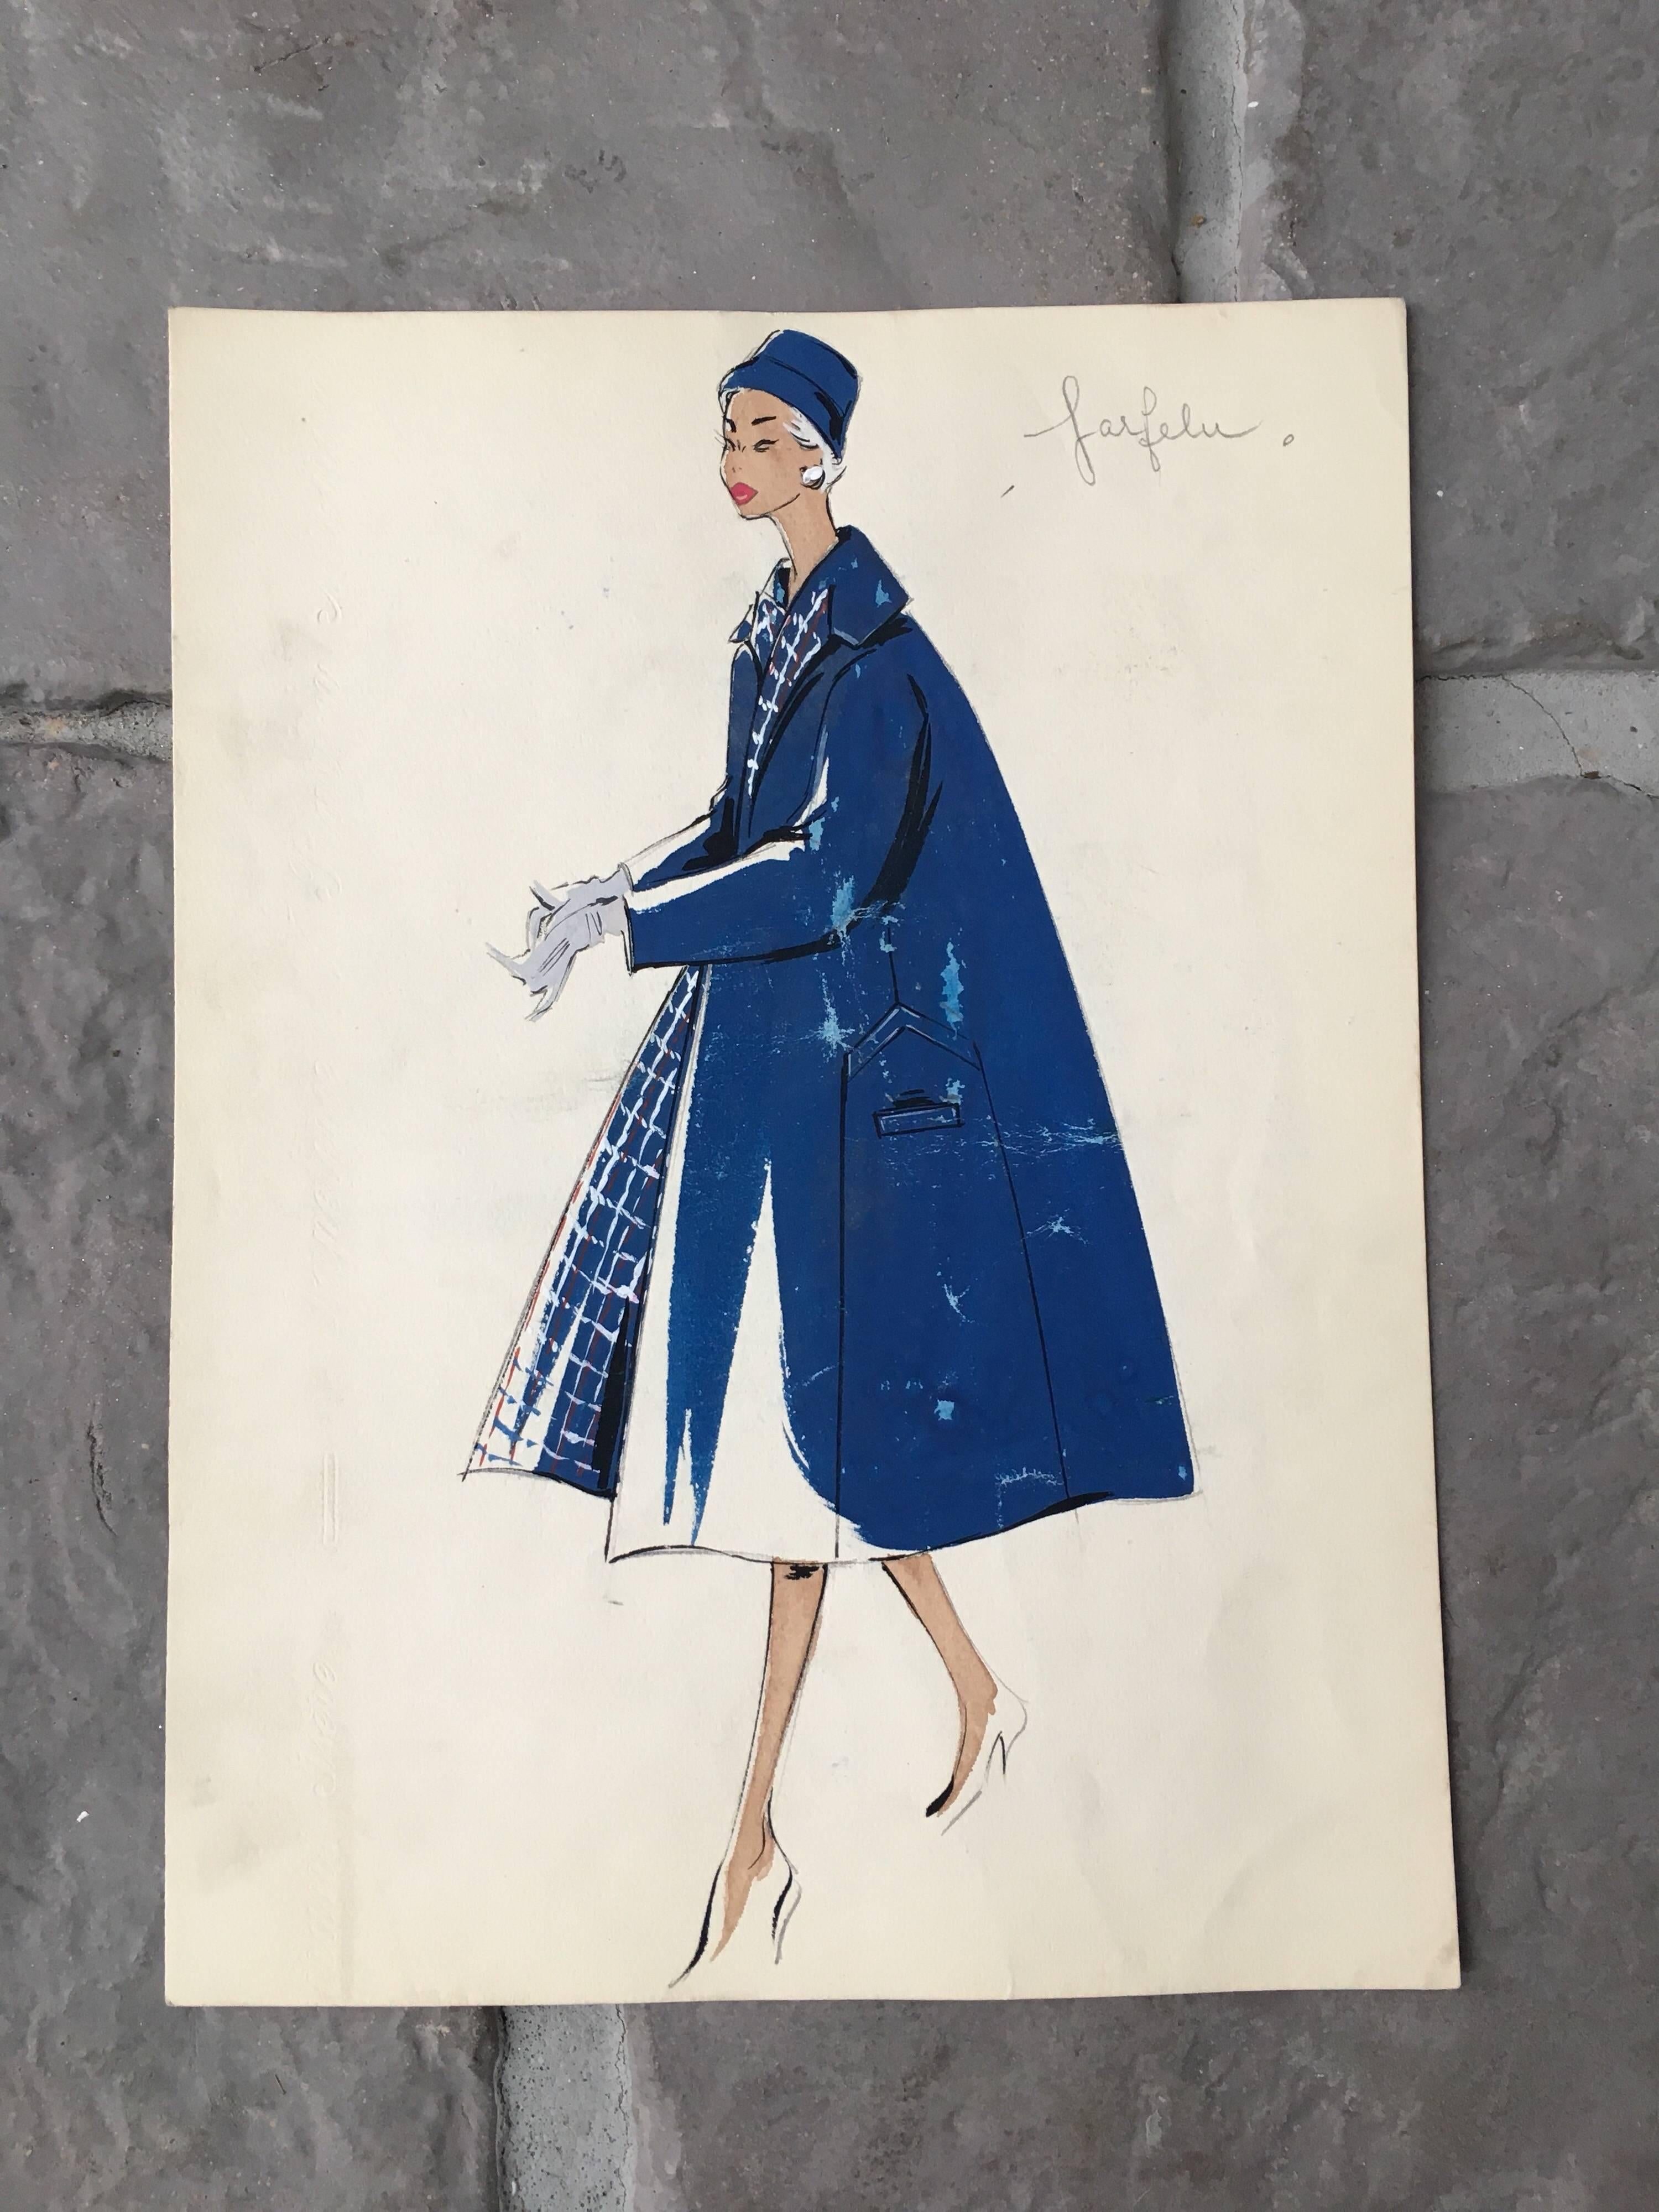 Lady in 1950's Blue Coat and Hat Coat Parisian Fashion Illustration Sketch - Painting by Unknown